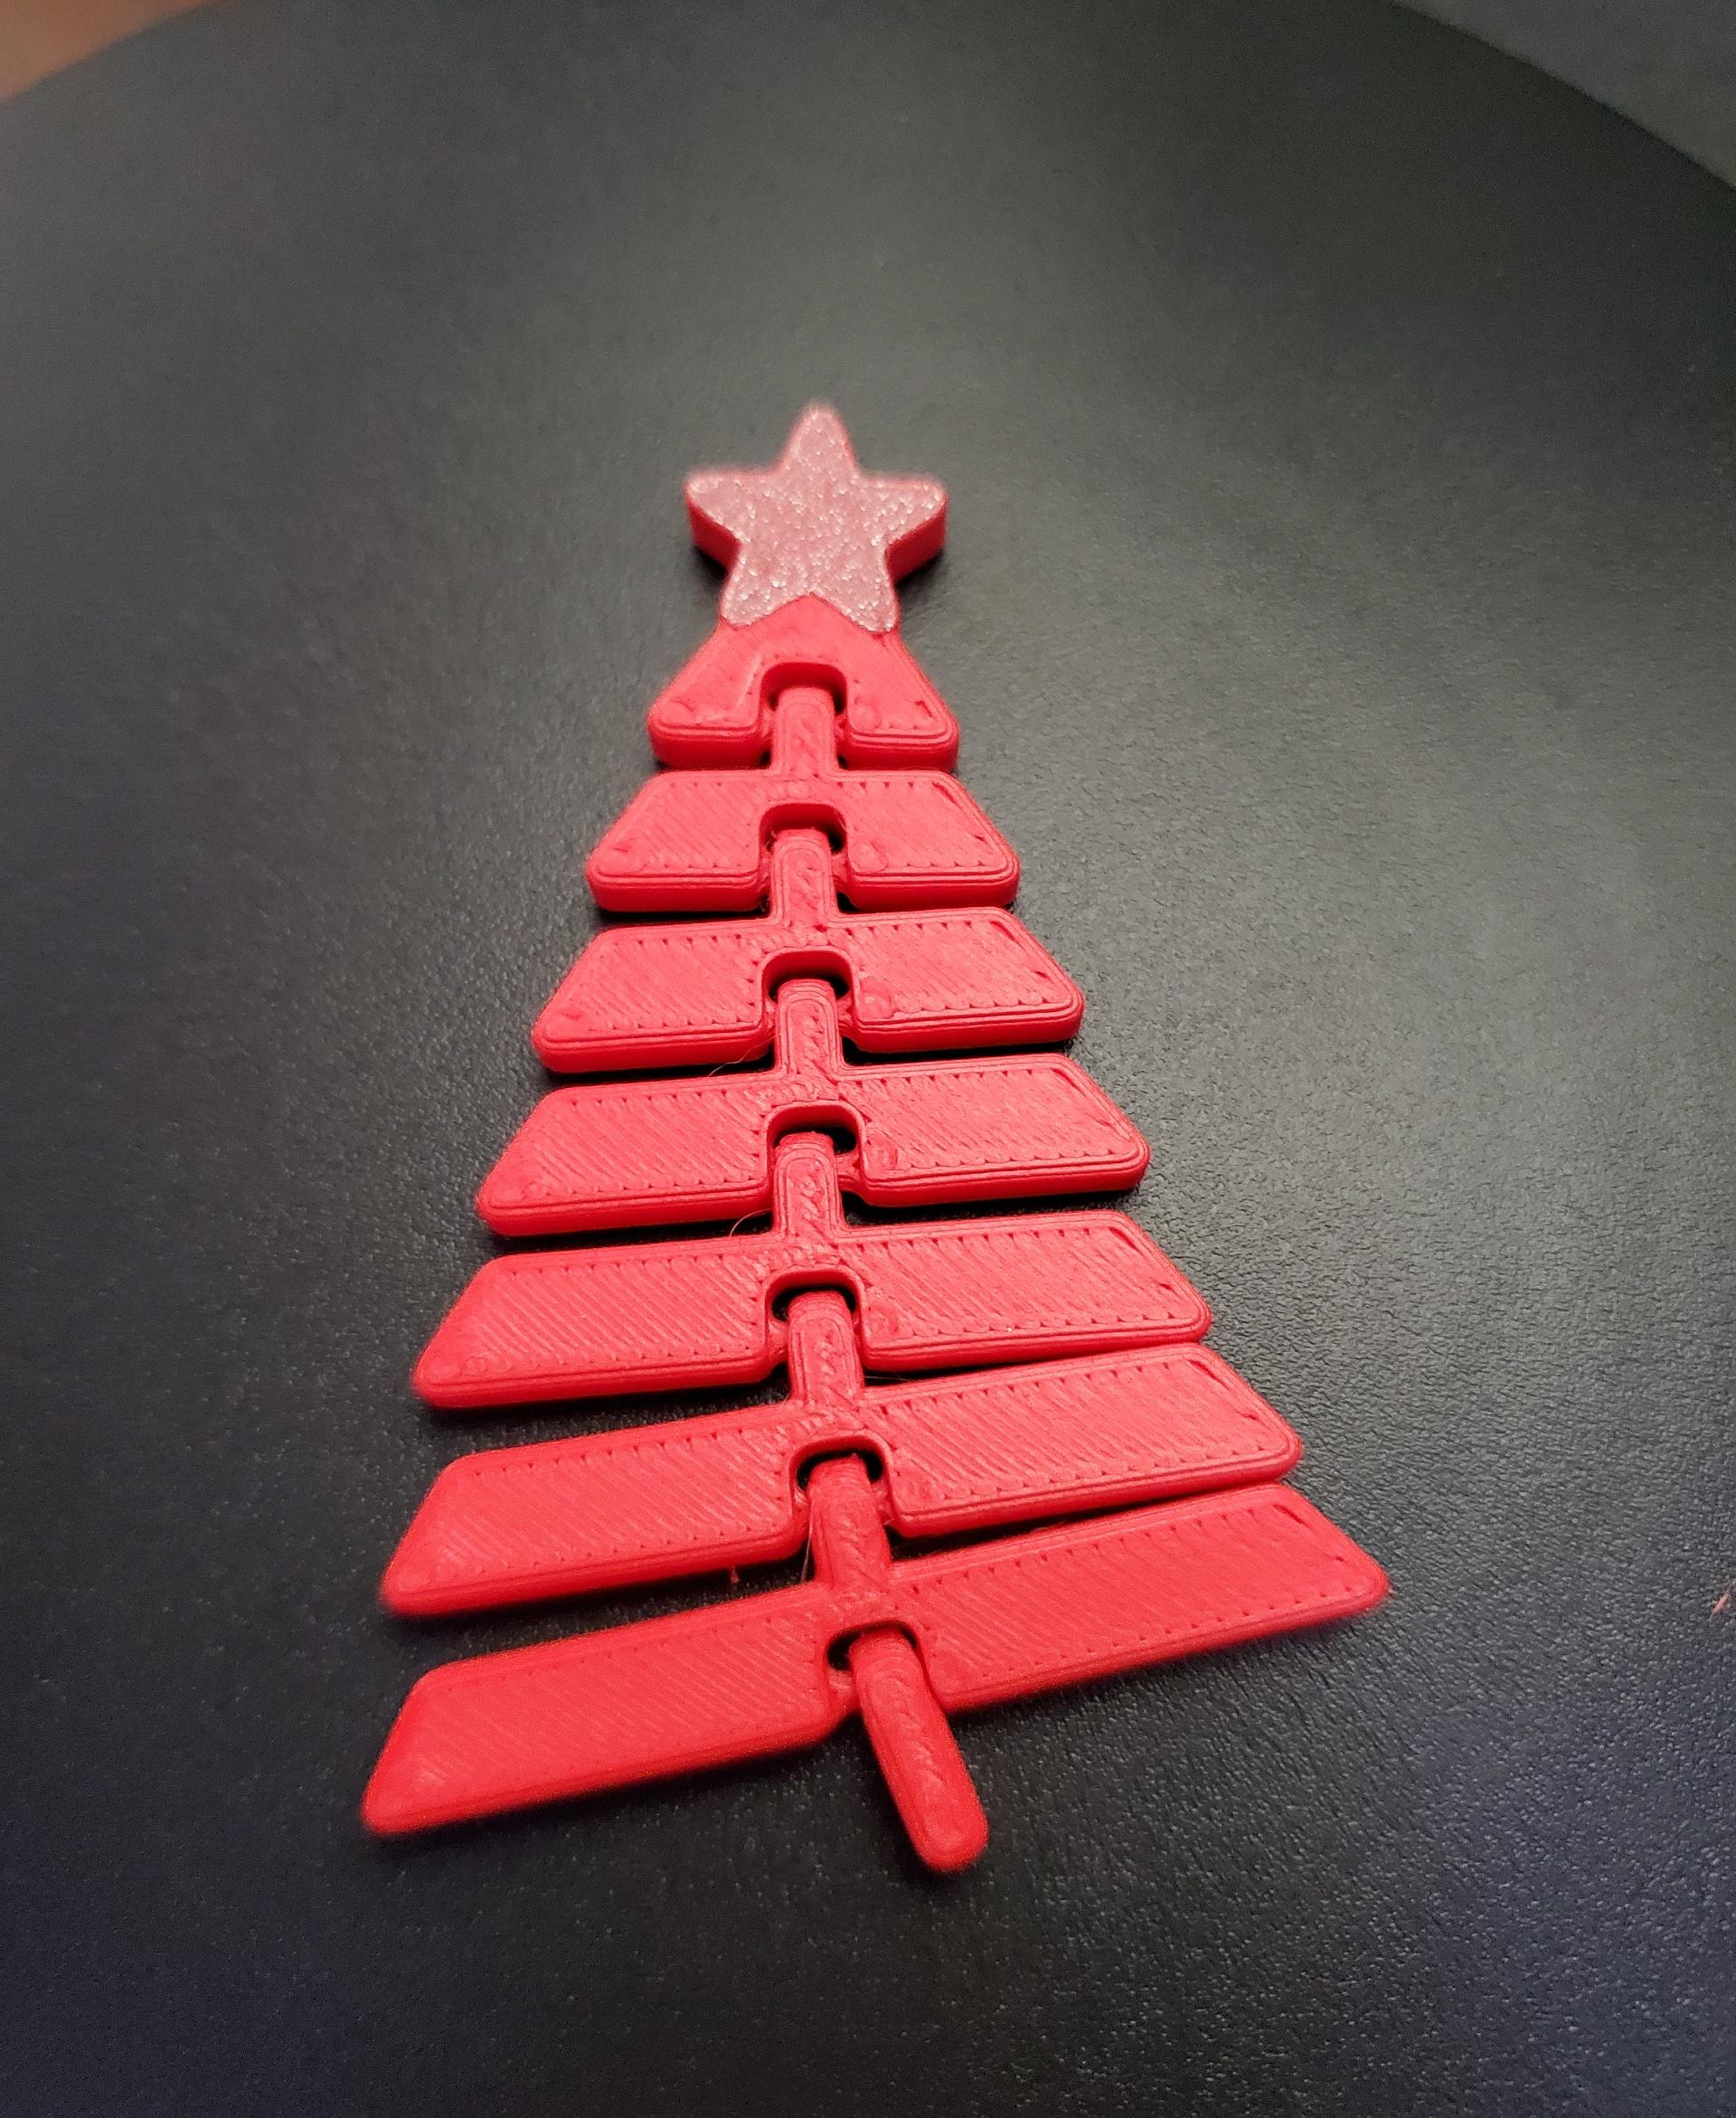 Articulated Christmas Tree with Star - Print in place fidget toy - 3mf - polyterra lava red - 3d model